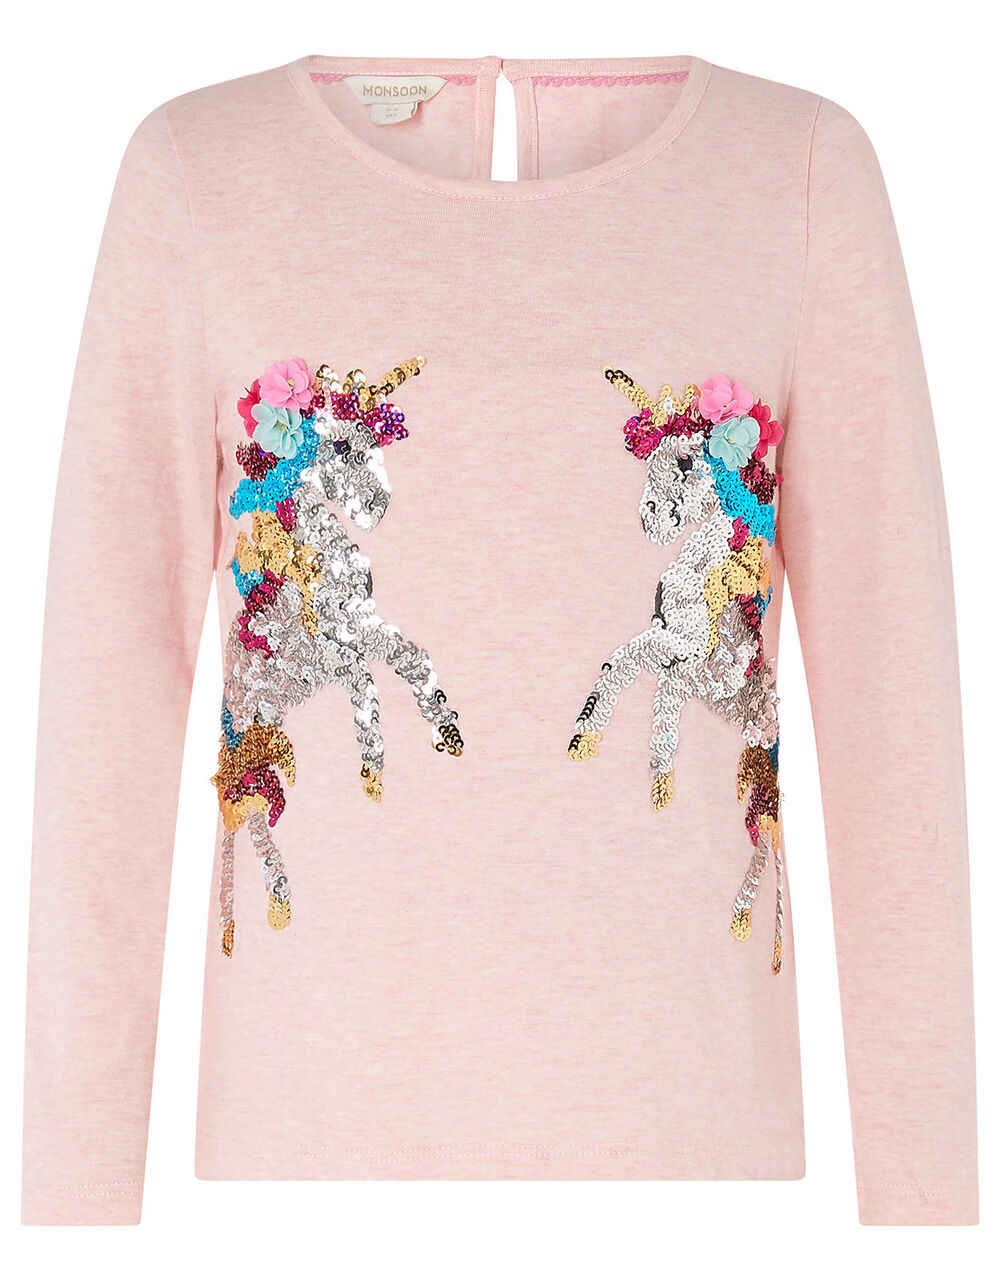 Sequin Unicorn Top in Organic Cotton Pink | Girls' Tops & T-shirts ...